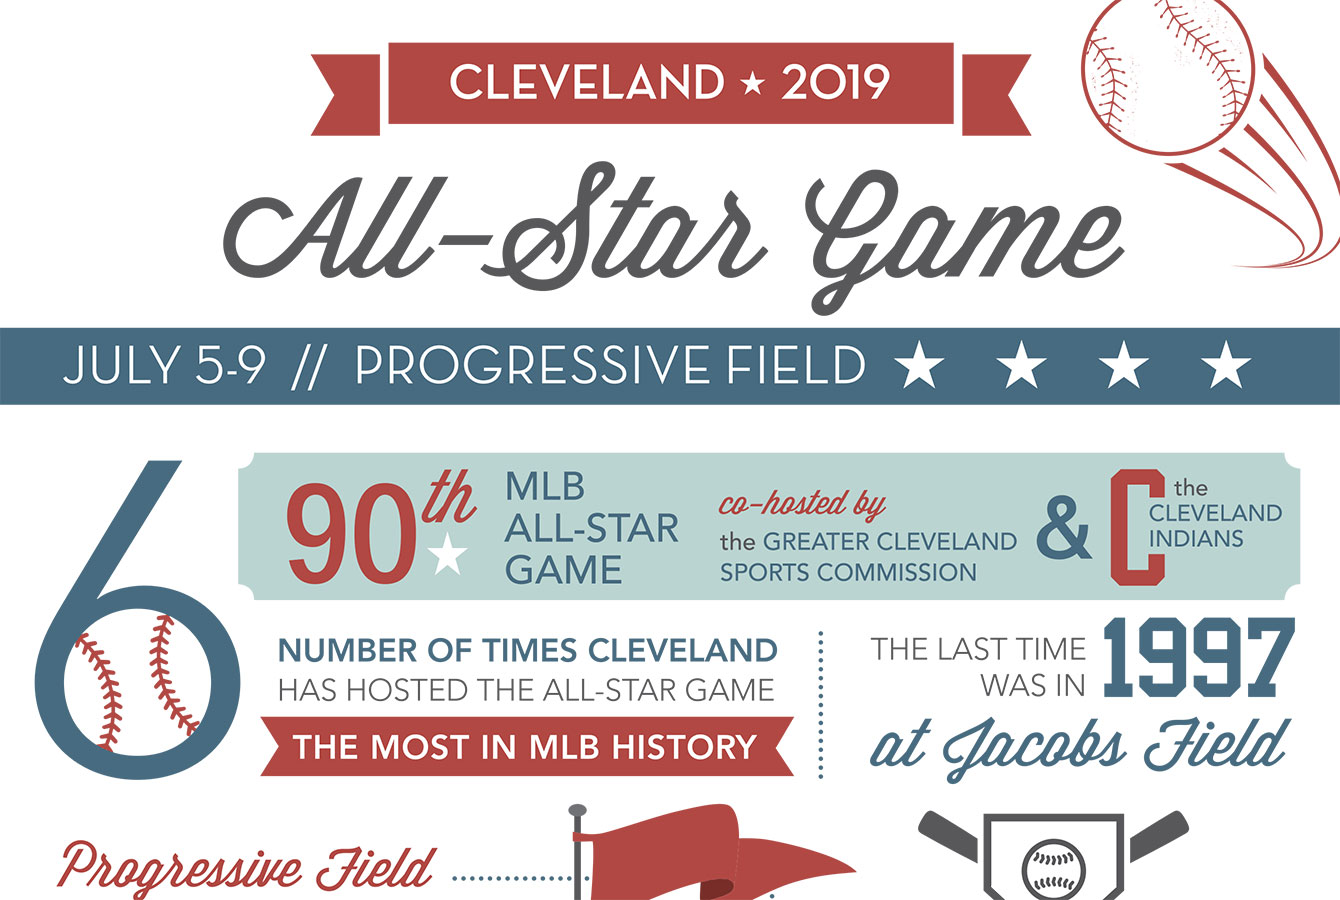 All Star Game Infographic